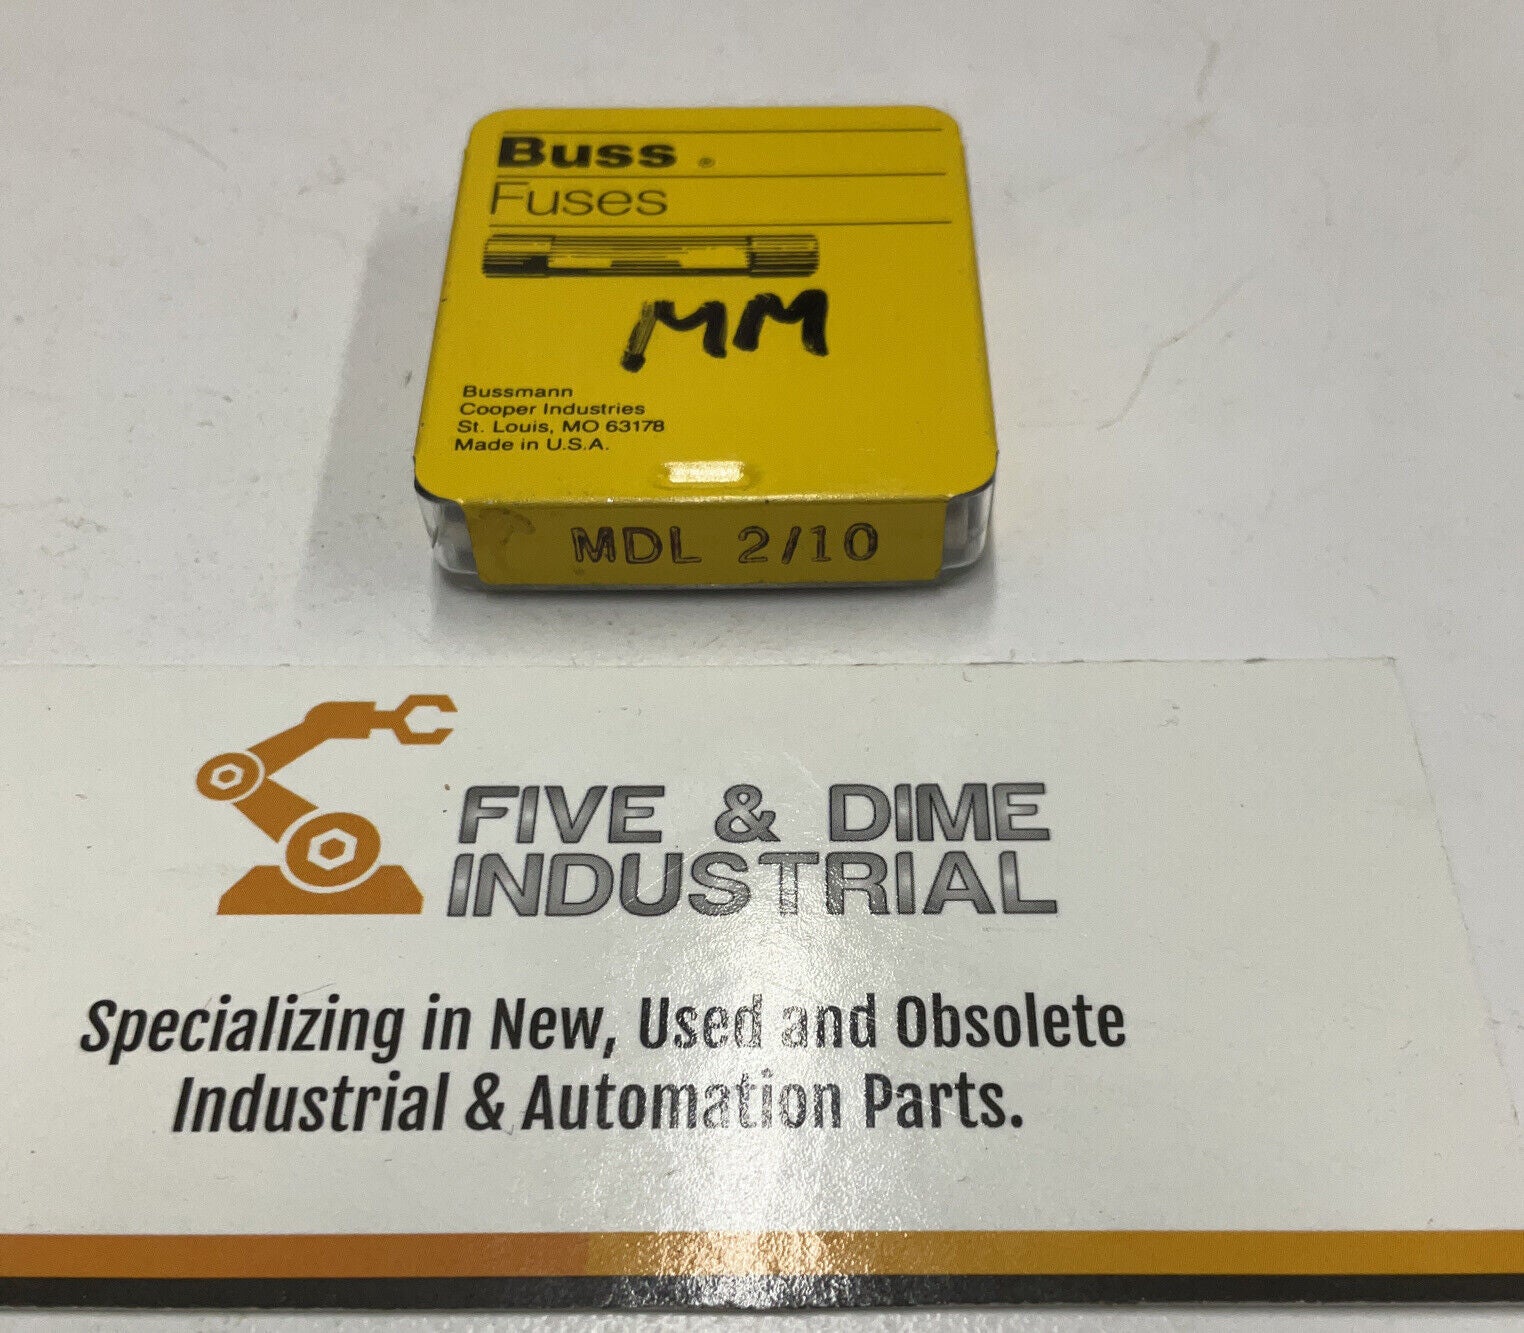 Buss Bussmann New MDL-2/10 FUSES Box of 5 (RE114) - 0